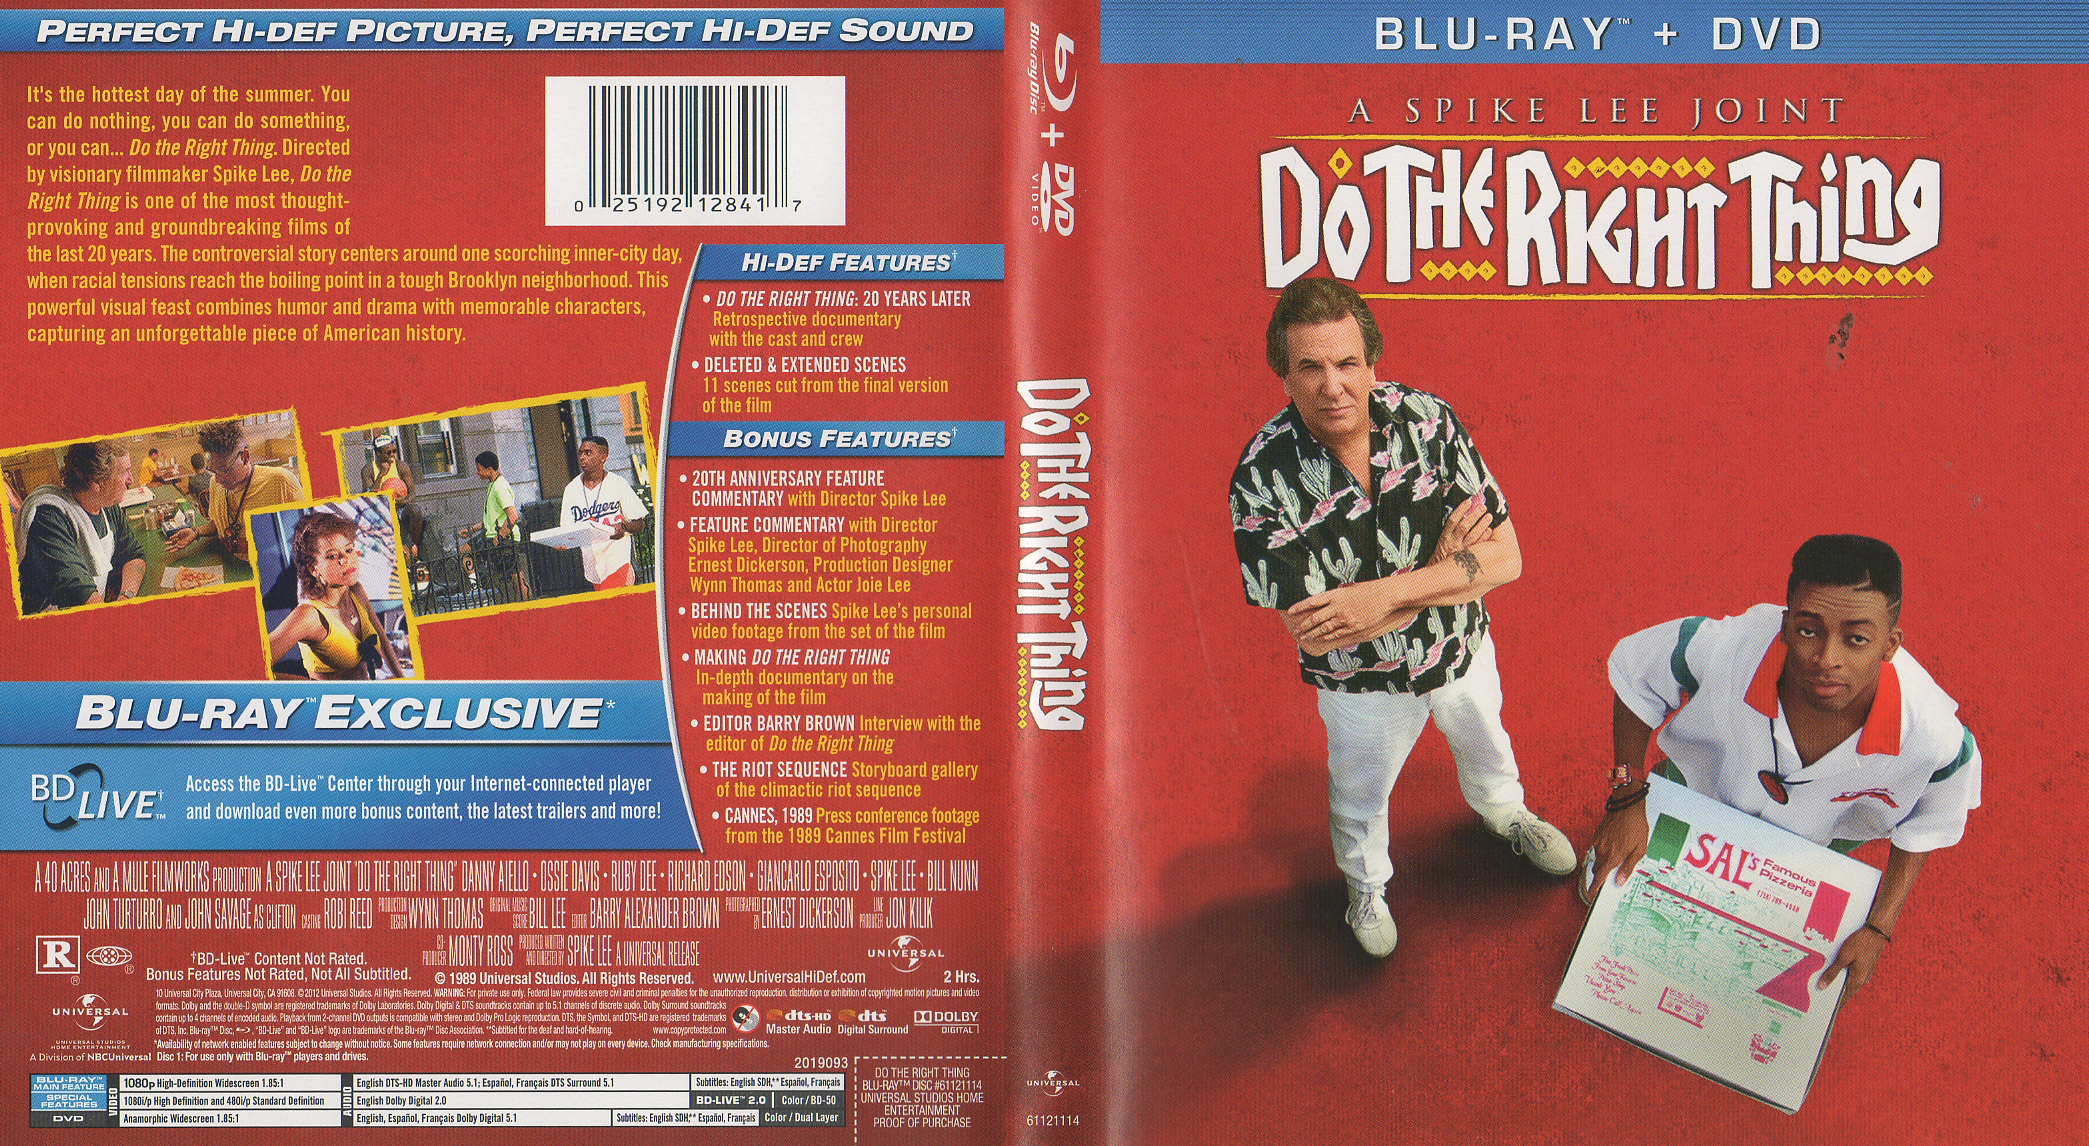 Jaquette DVD Do the Right Thing Zone 1 (BLU-RAY)